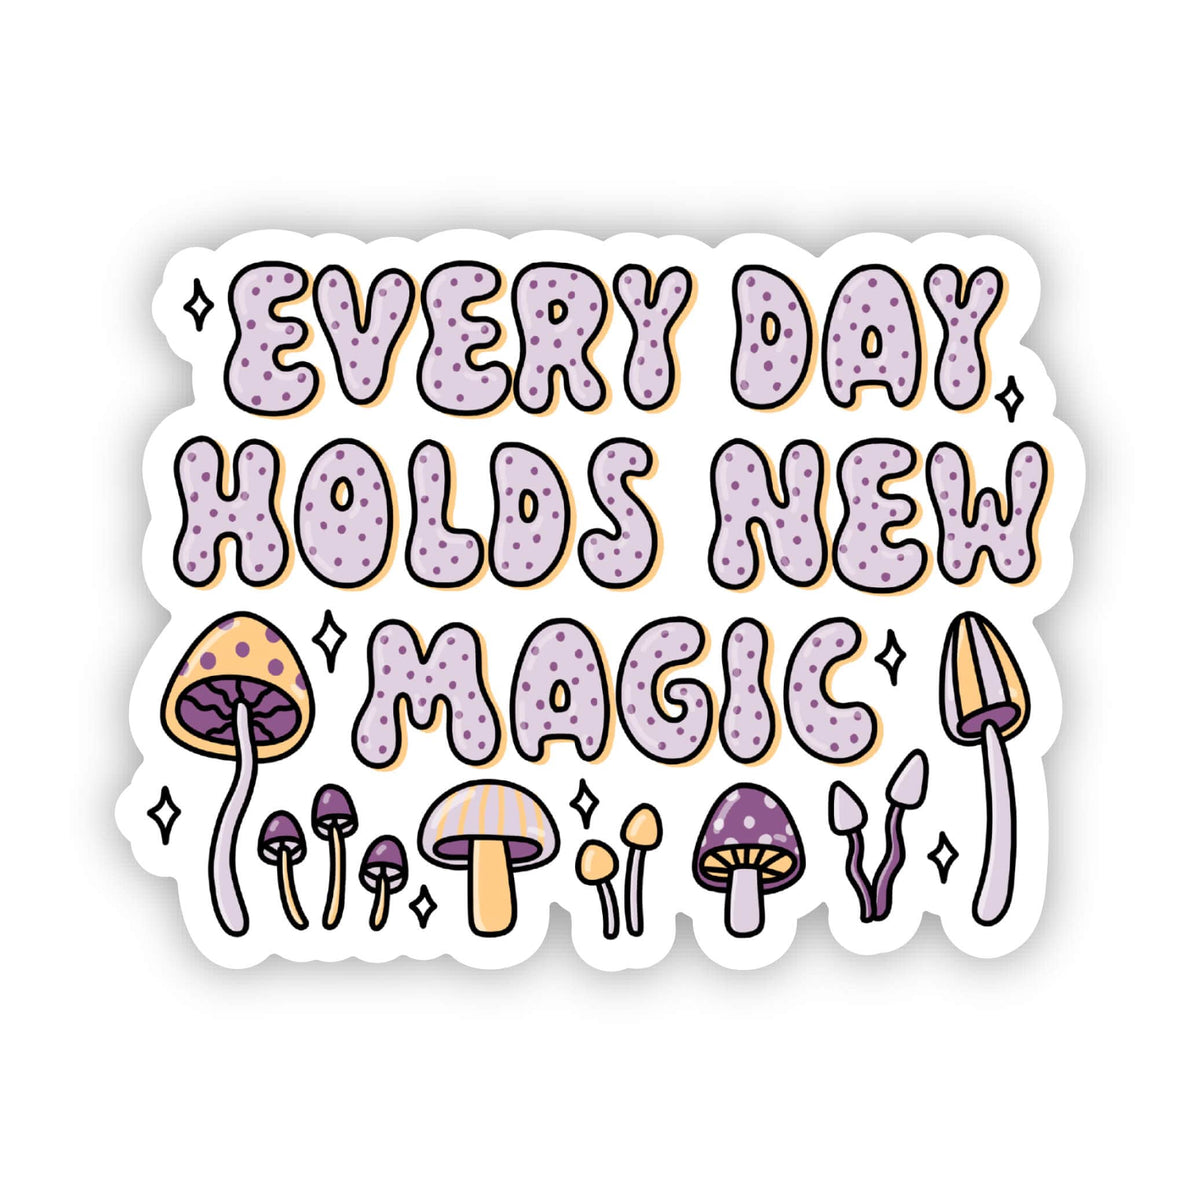 &quot;Every day holds new magic&quot; sticker